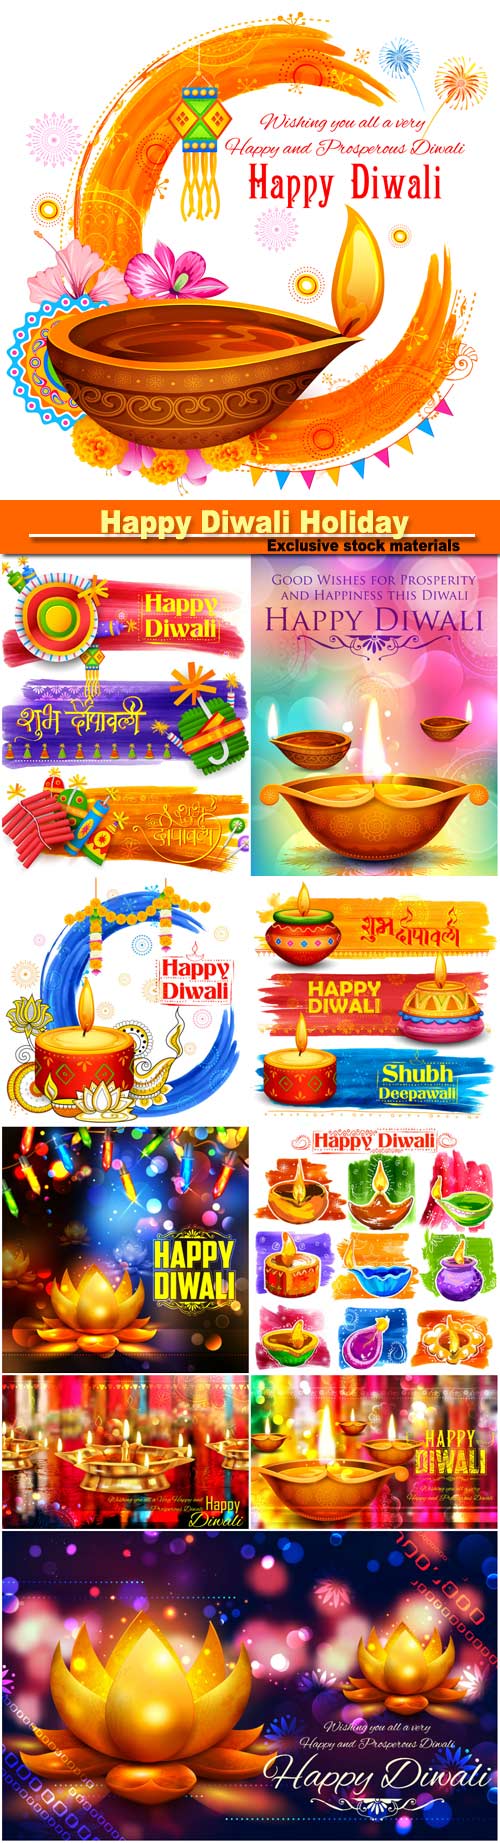 Happy Diwali Holiday background for light festival of India